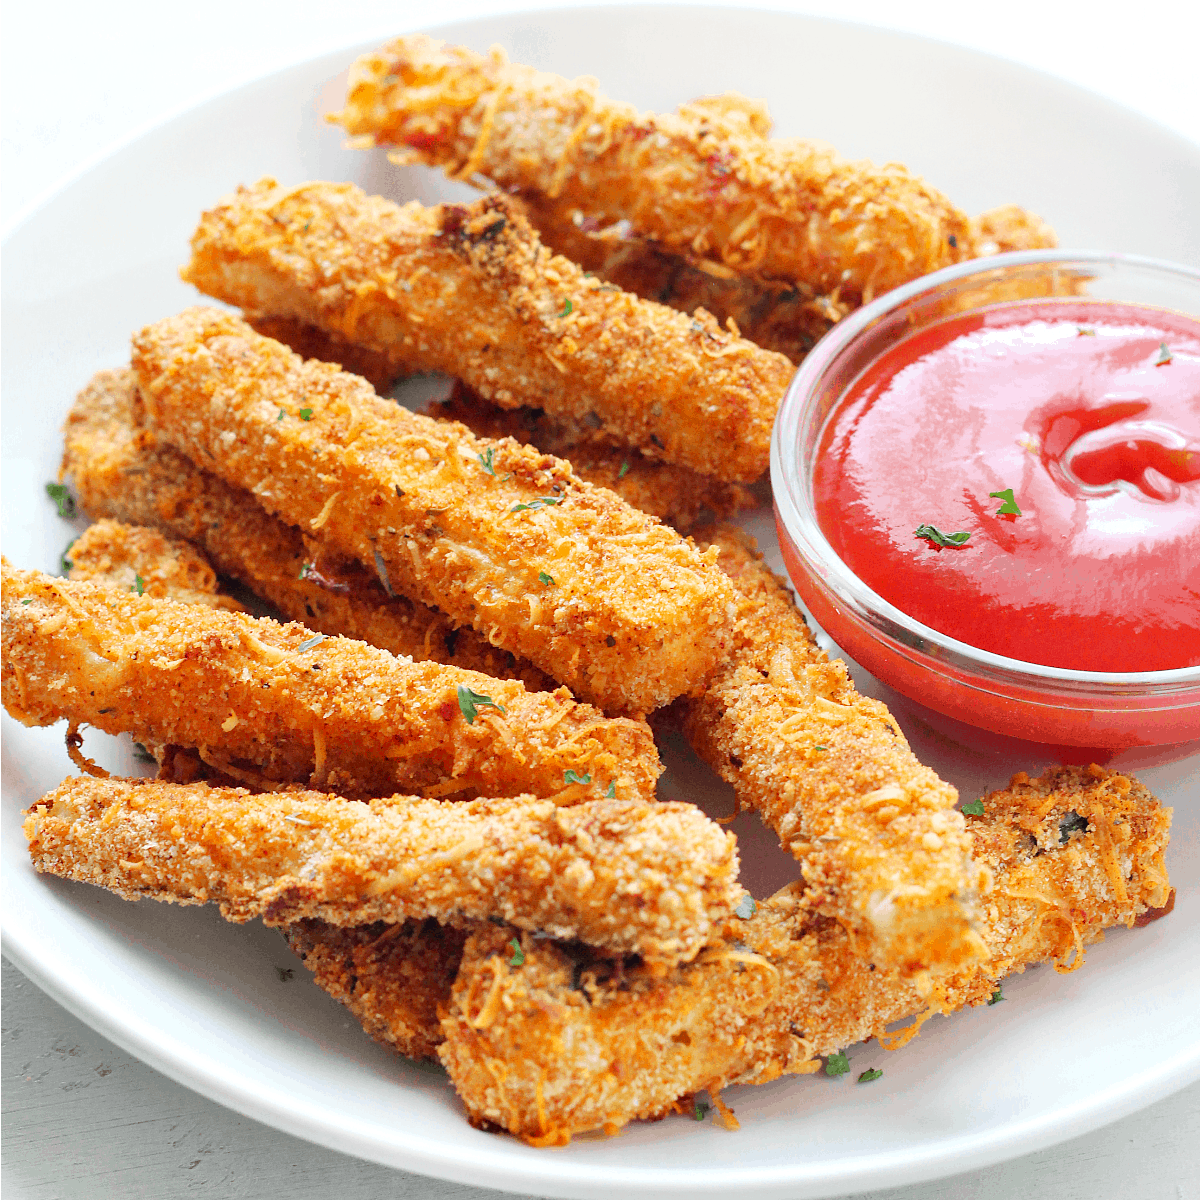 Zucchini fries on a plate with ketchup.